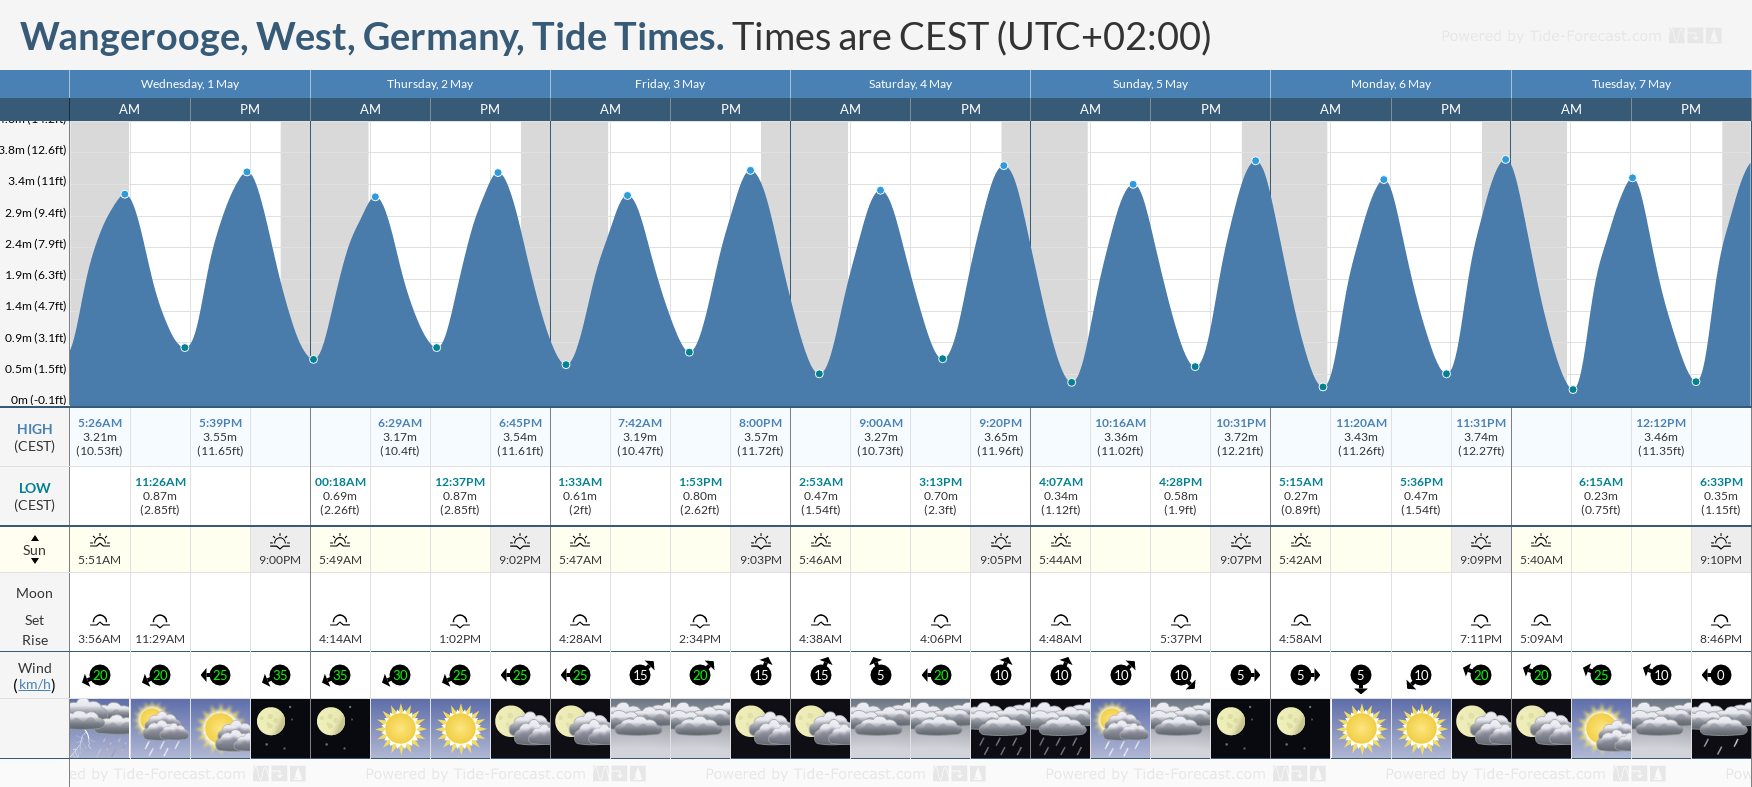 Wangerooge, West, Germany Tide Chart including high and low tide times for the next 7 days